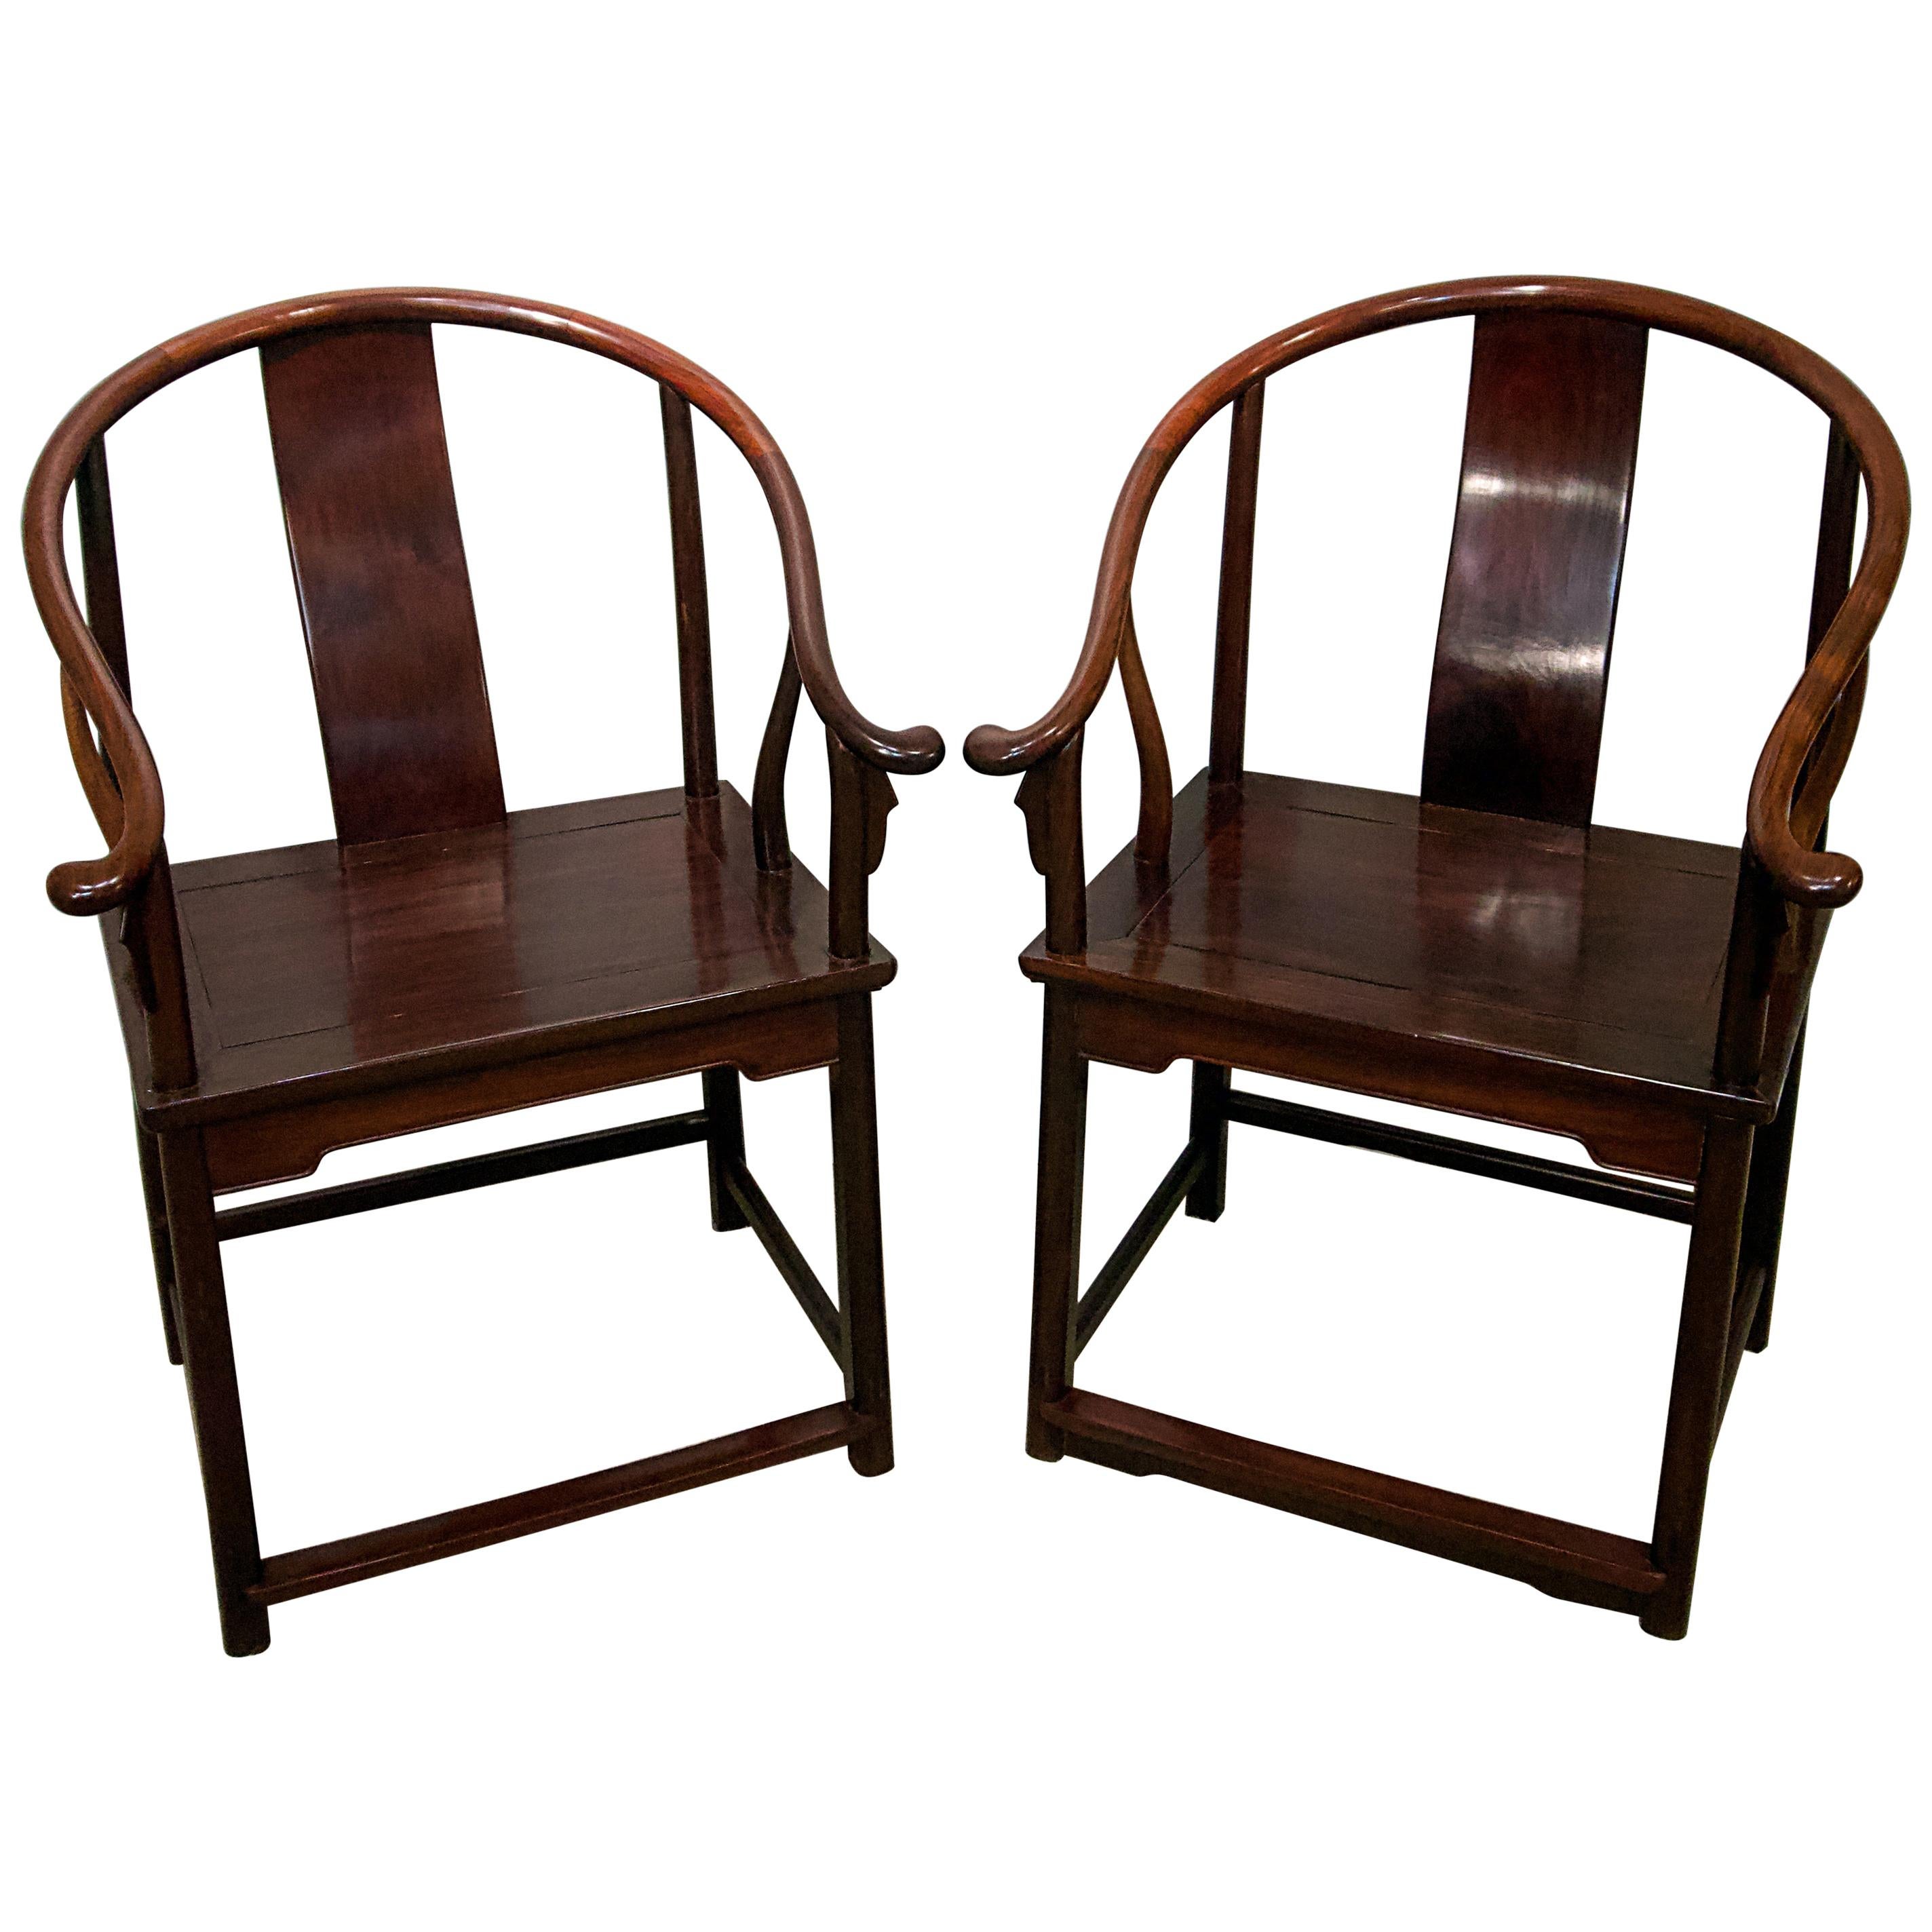 Pair of Antique Chinese Rosewood Horseshoe Back Armchairs